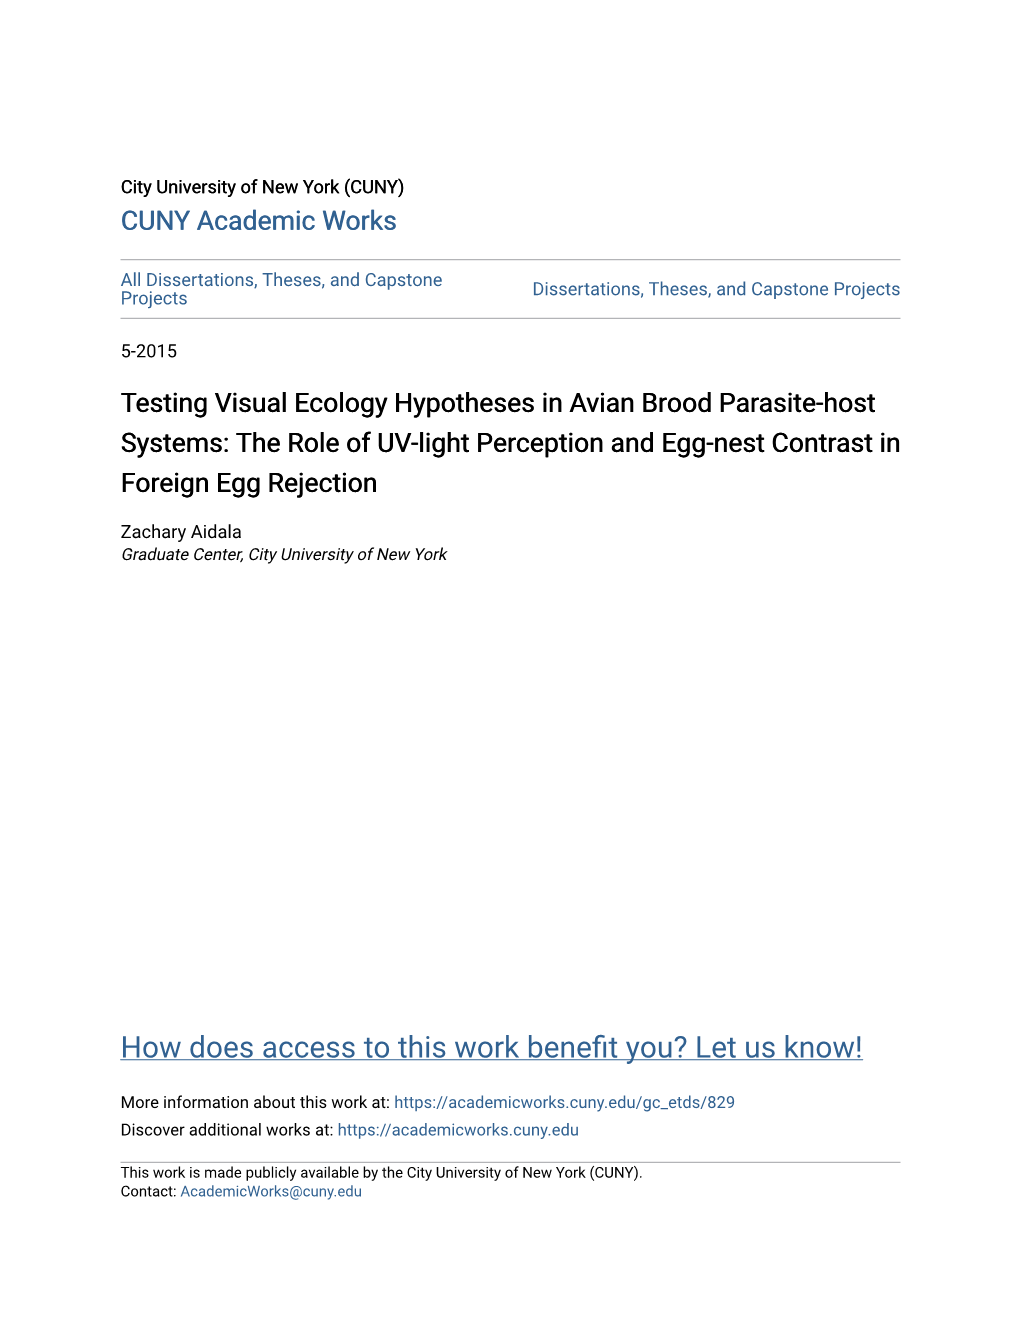 Testing Visual Ecology Hypotheses in Avian Brood Parasite-Host Systems: the Role of UV-Light Perception and Egg-Nest Contrast in Foreign Egg Rejection